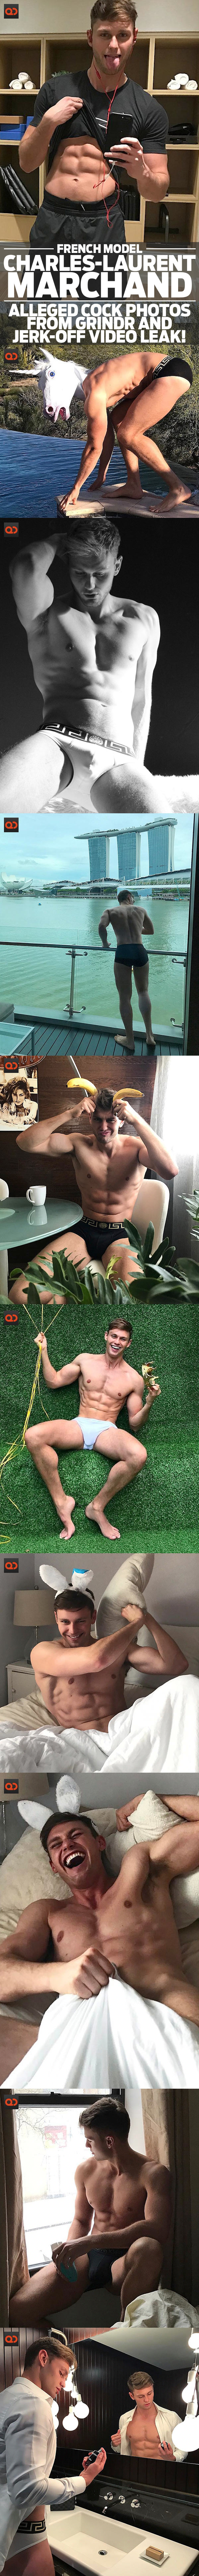 Charles-Laurent Marchand, French Model, Alleged Cock Photos From Grindr And Jerk-Off Video Leak!